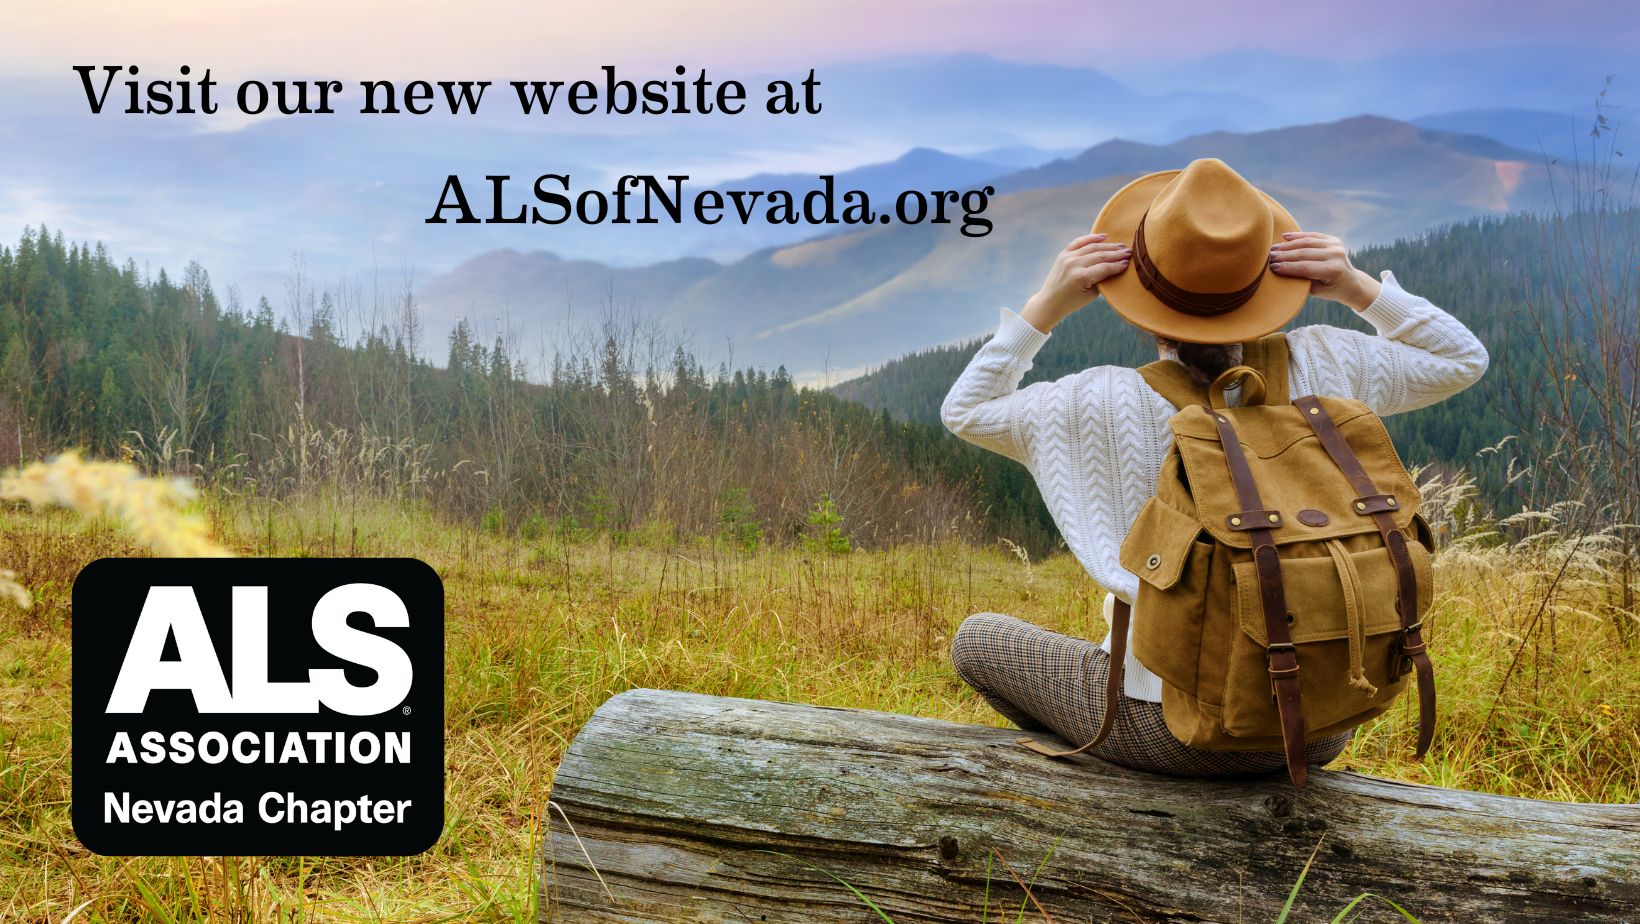 Visit our new website at ALSofNevada.org